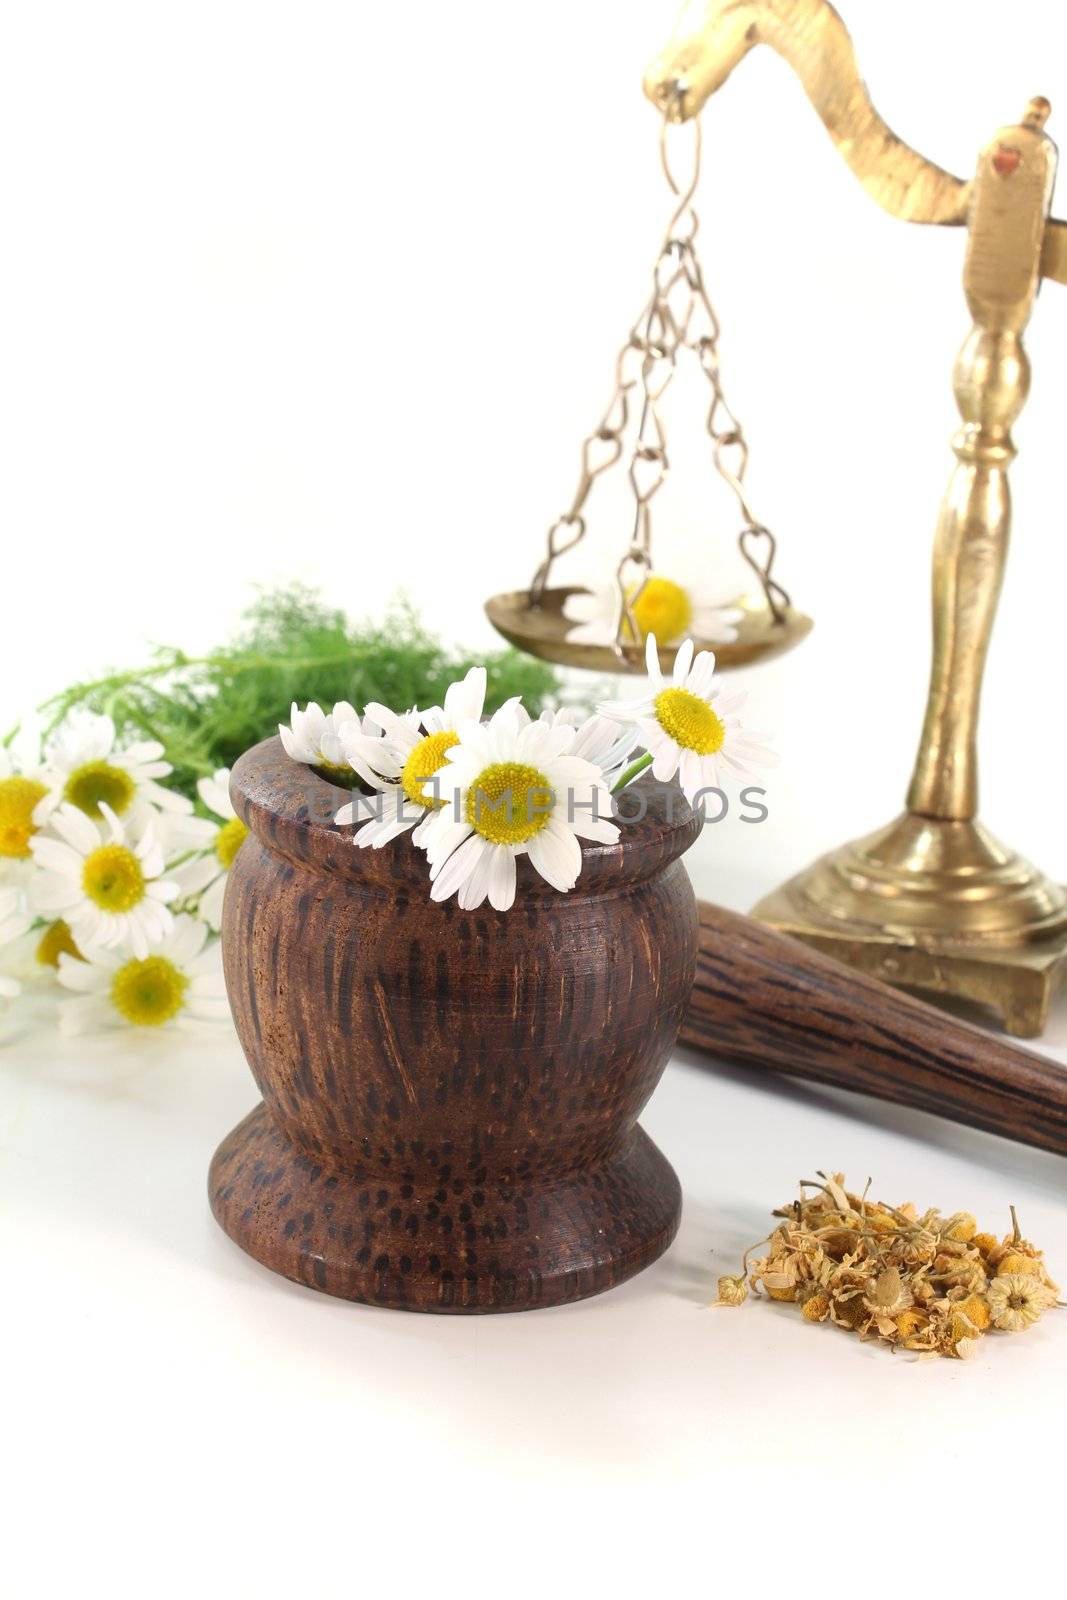 dried chamomile flowers with fresh chamomile and mortar and scales on white background